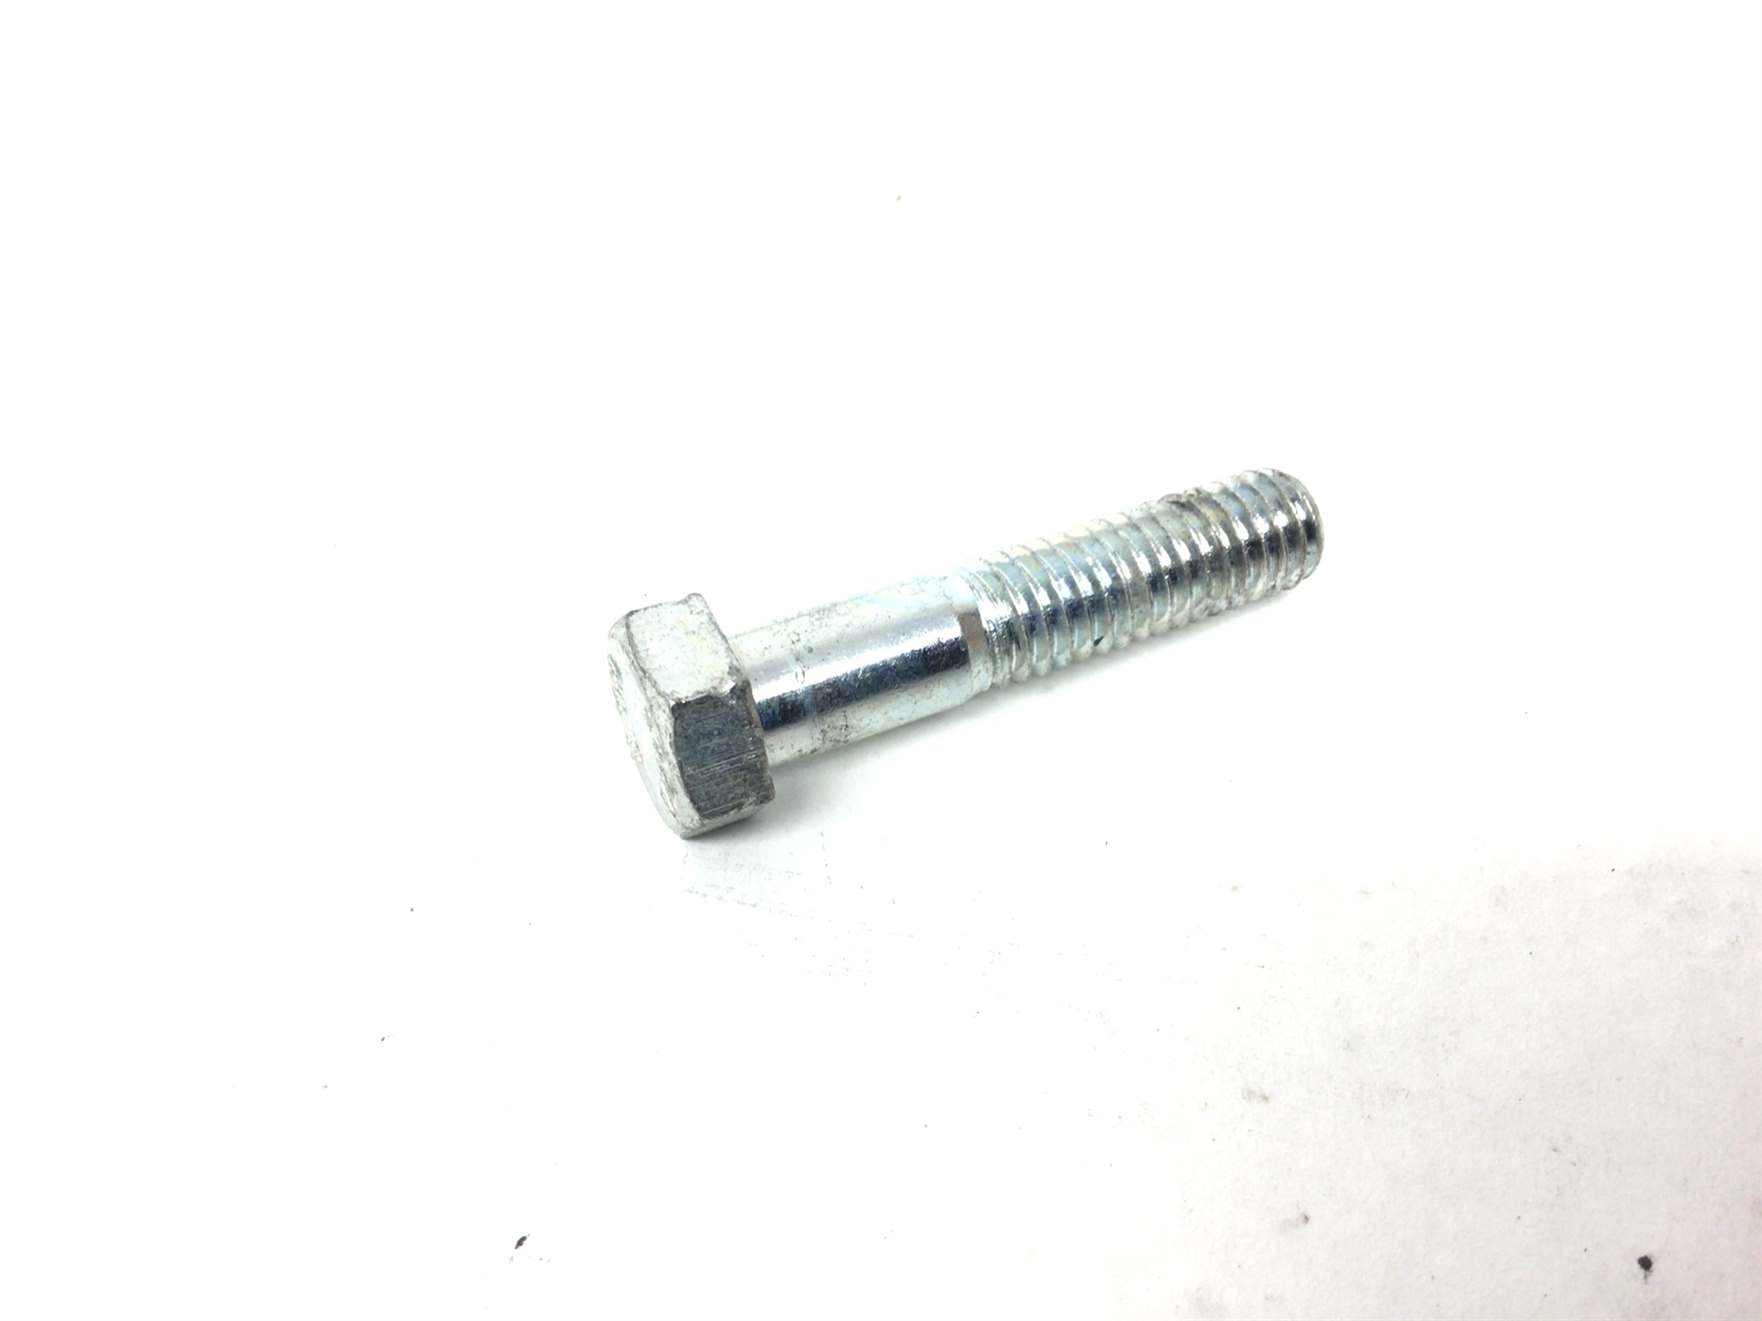 Inch Hex Bolt 3/8 - 16 x 1.75 (Used)